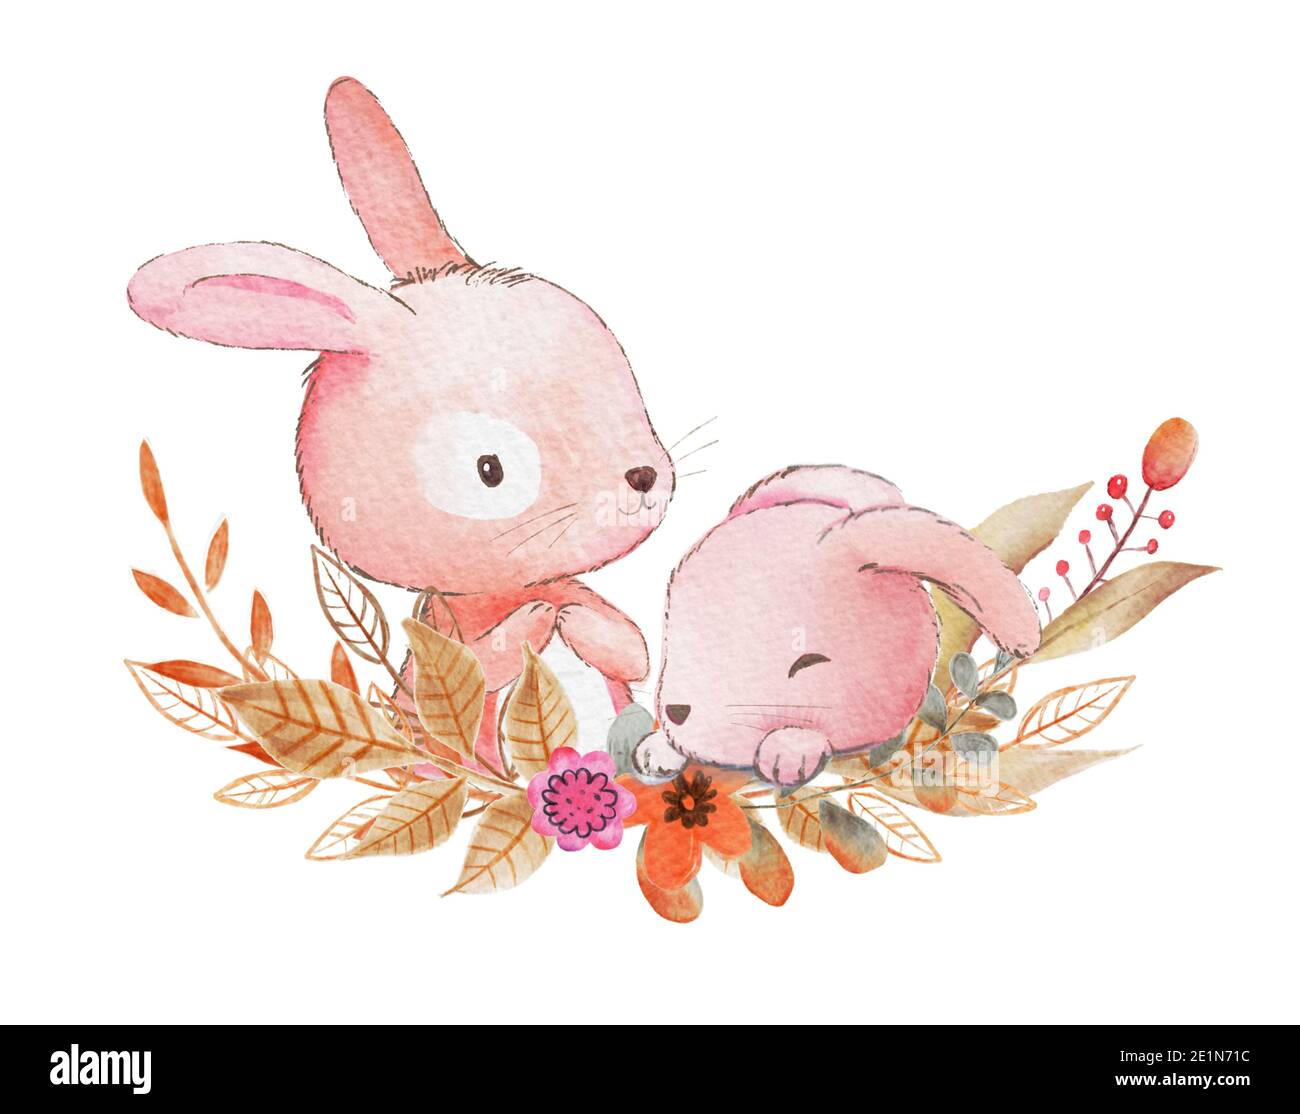 Card with two watercolor rabbits. Hand drawn watercolor bunny illustration. Stock Photo